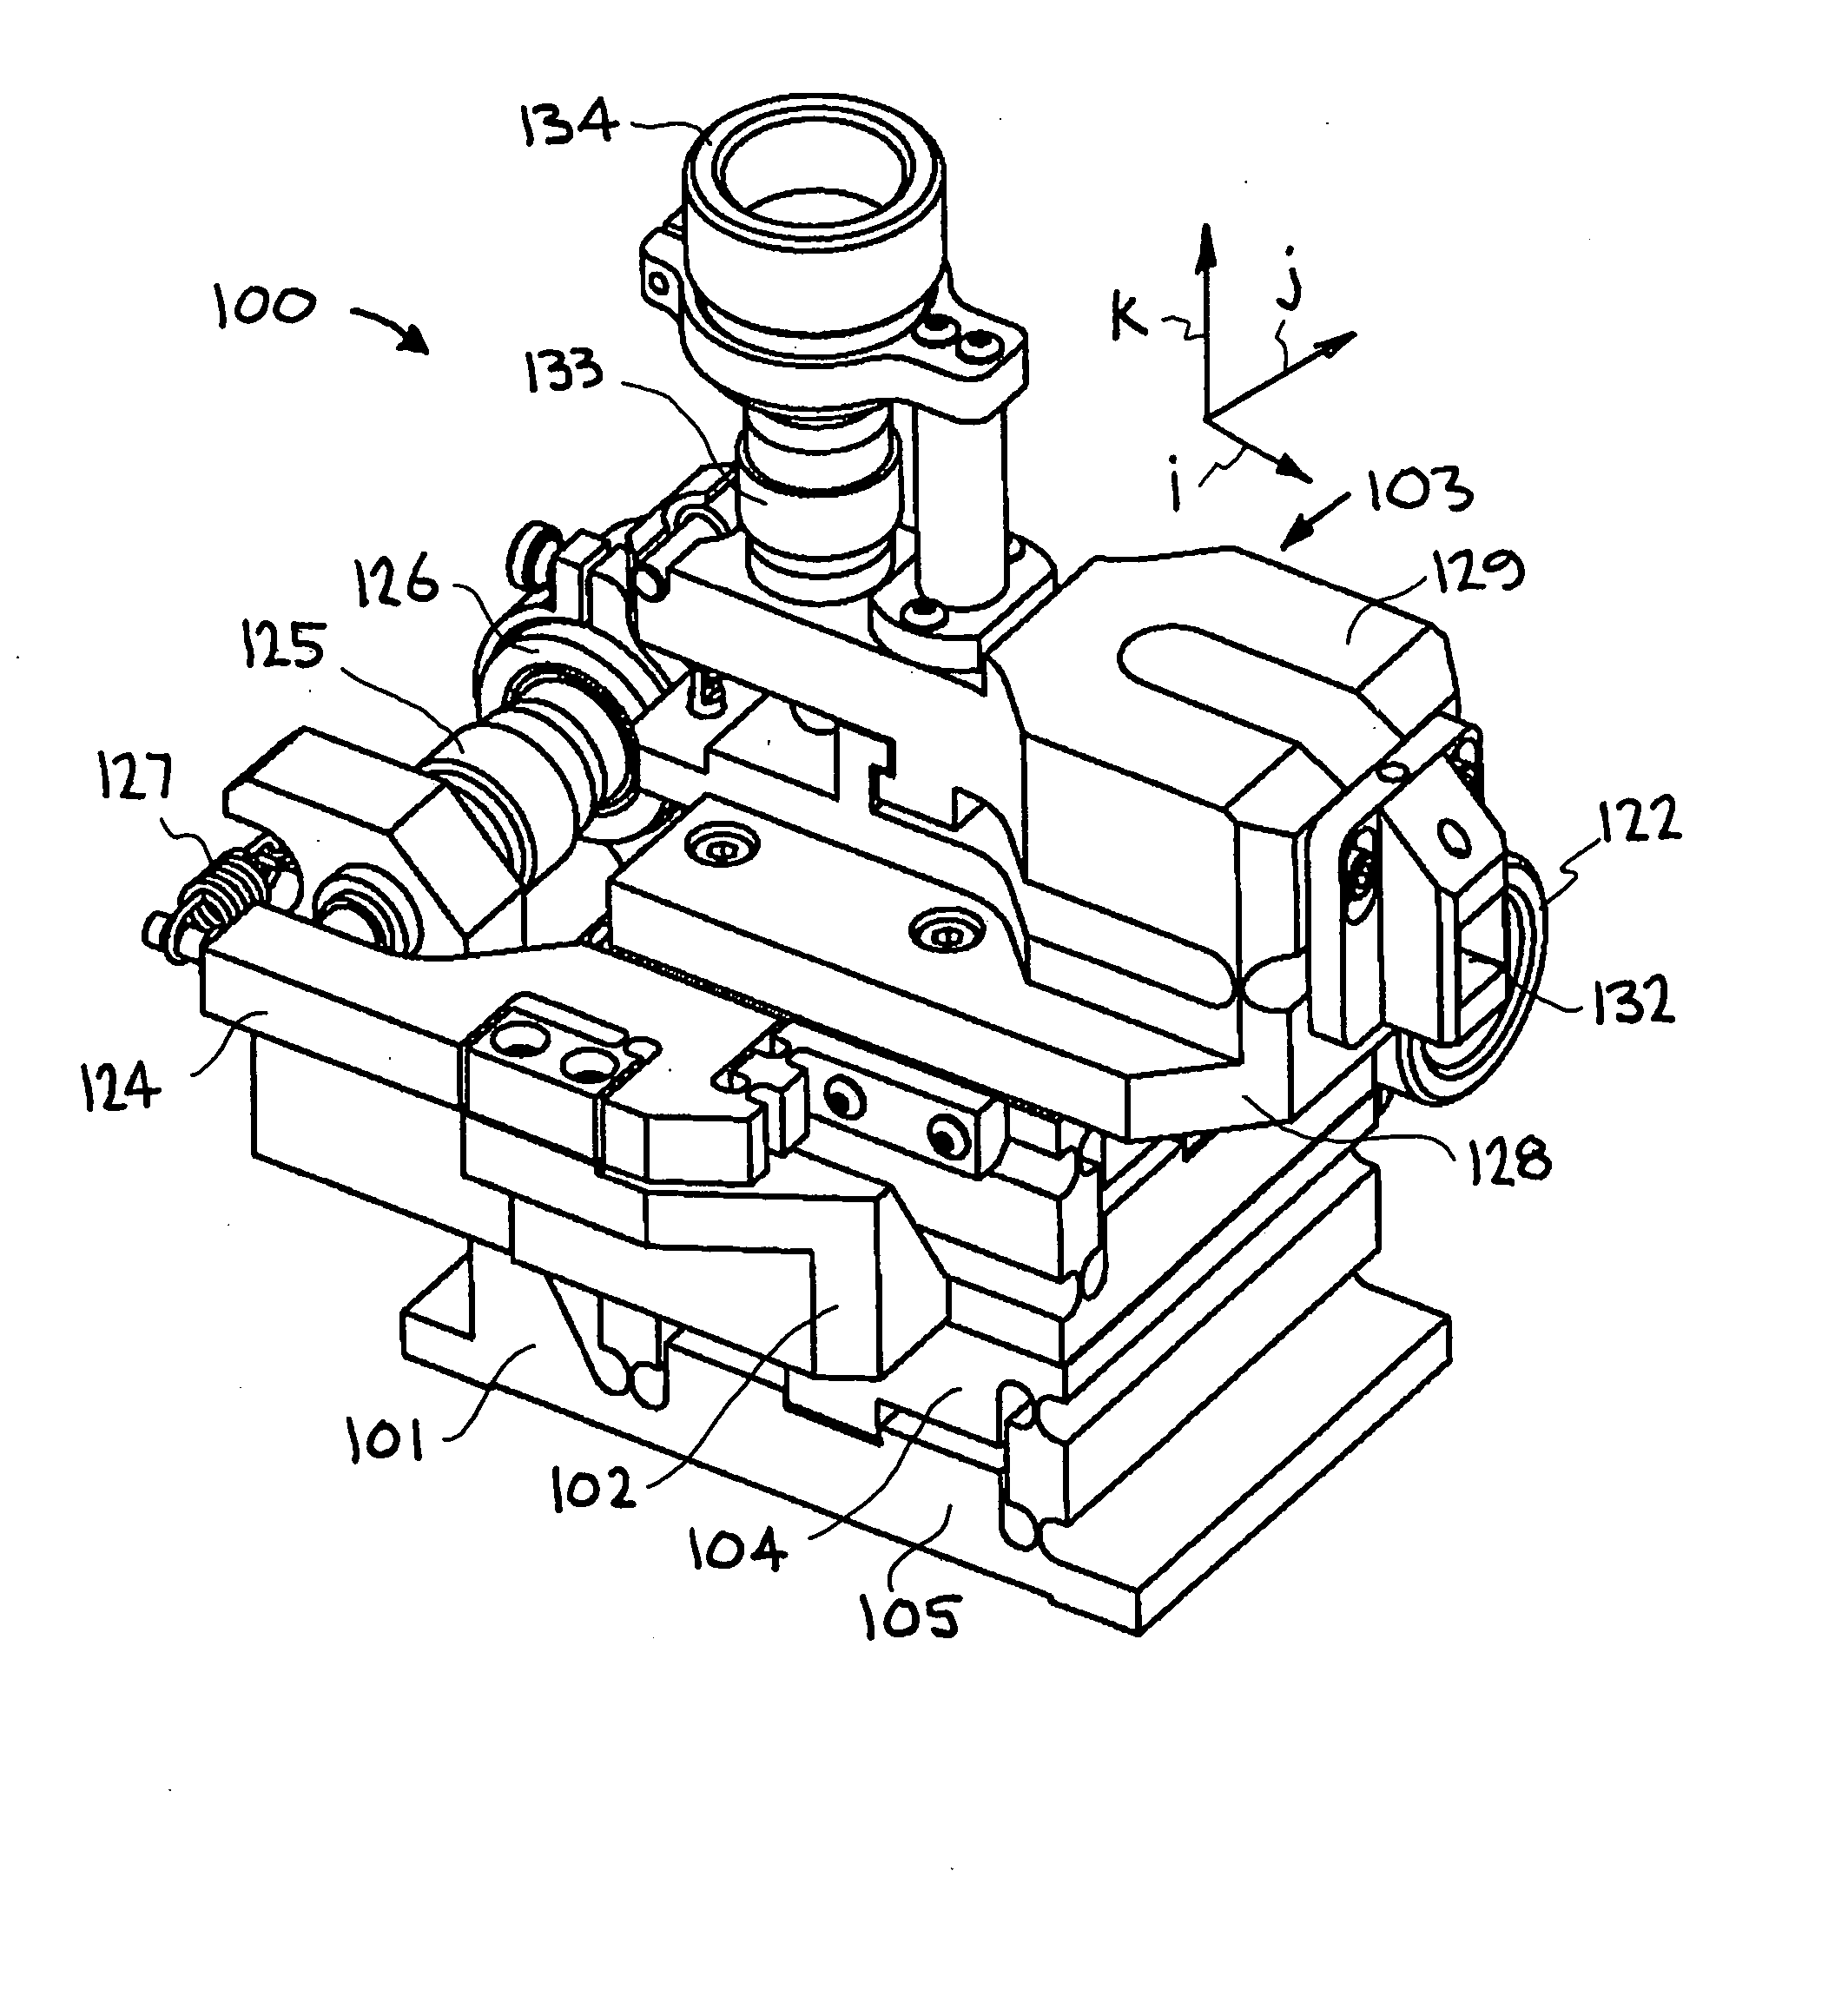 Precision tool holder with flexure-adjusted, three degrees of freedom for a four-axis lathe